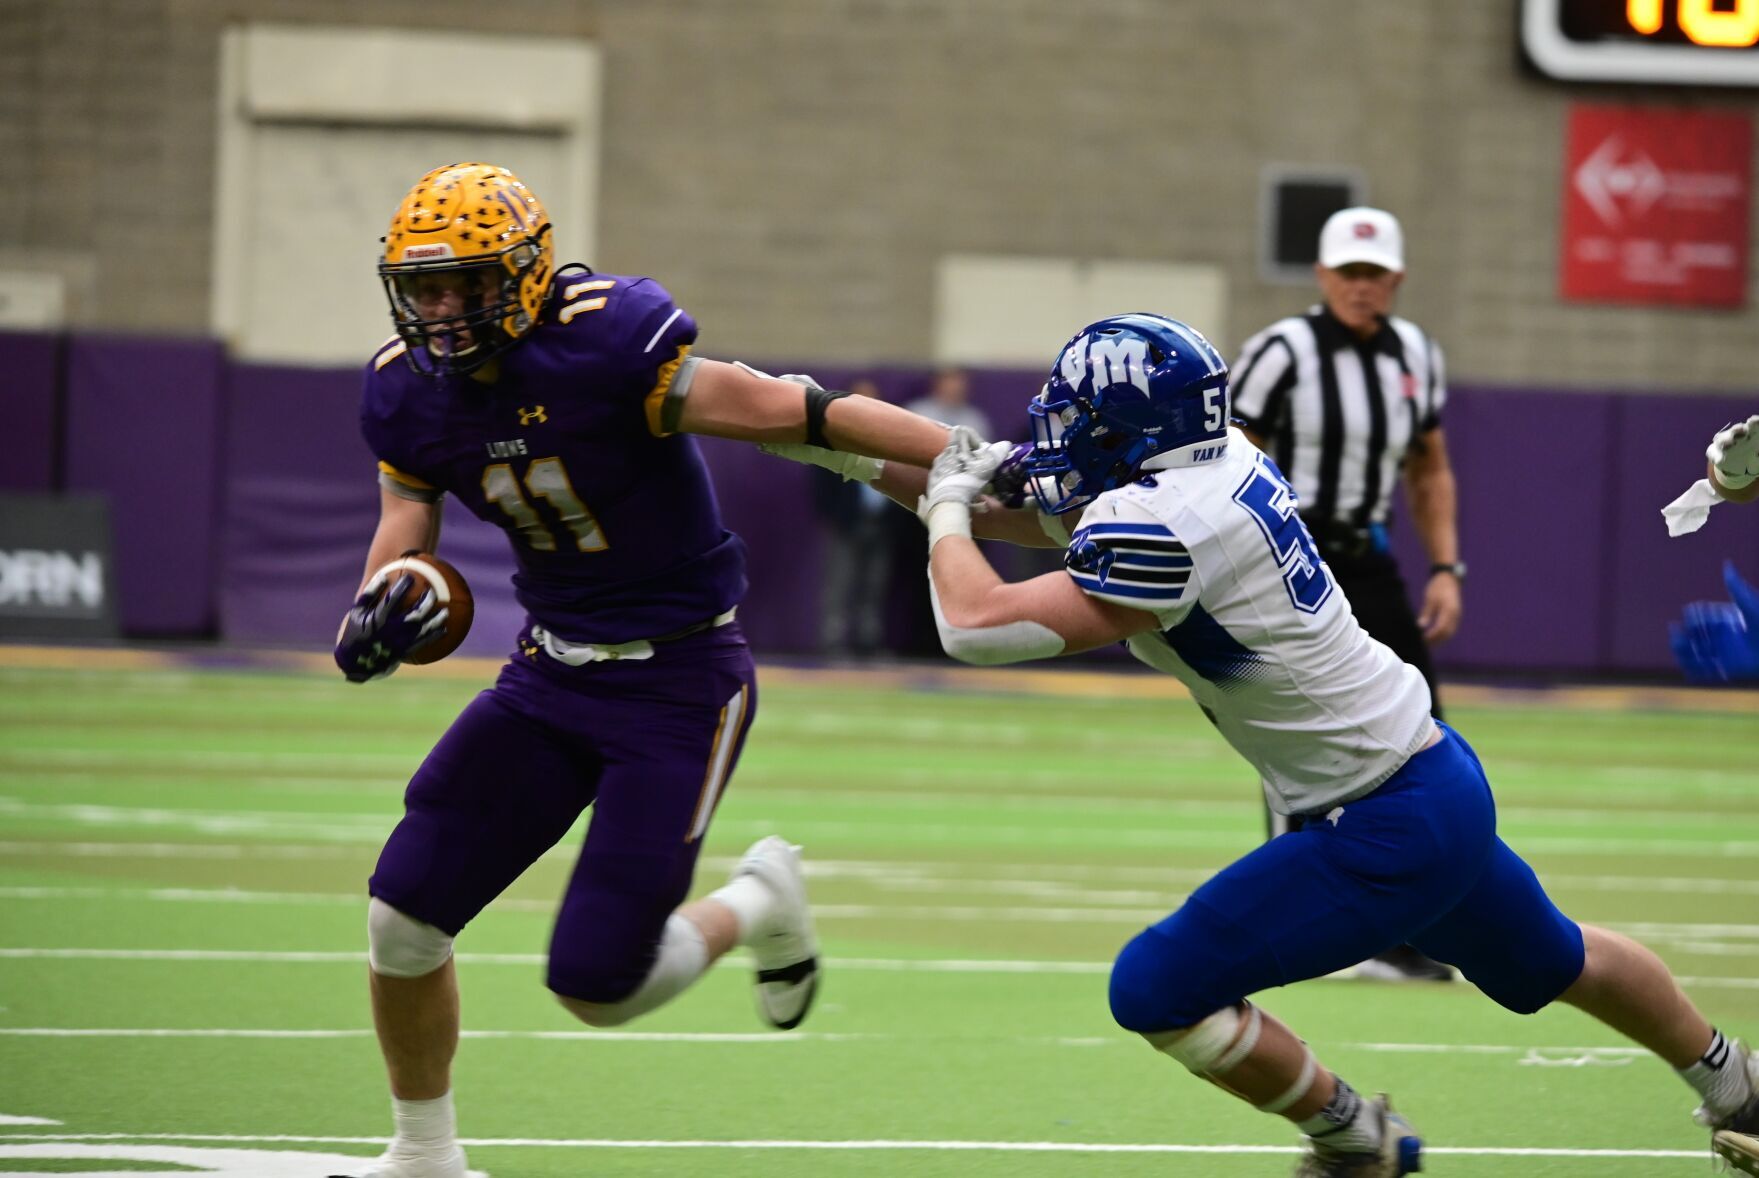 Central Lyon/George-Little Rock Narrowly Misses Victory in Iowa Class 2A Championship Game